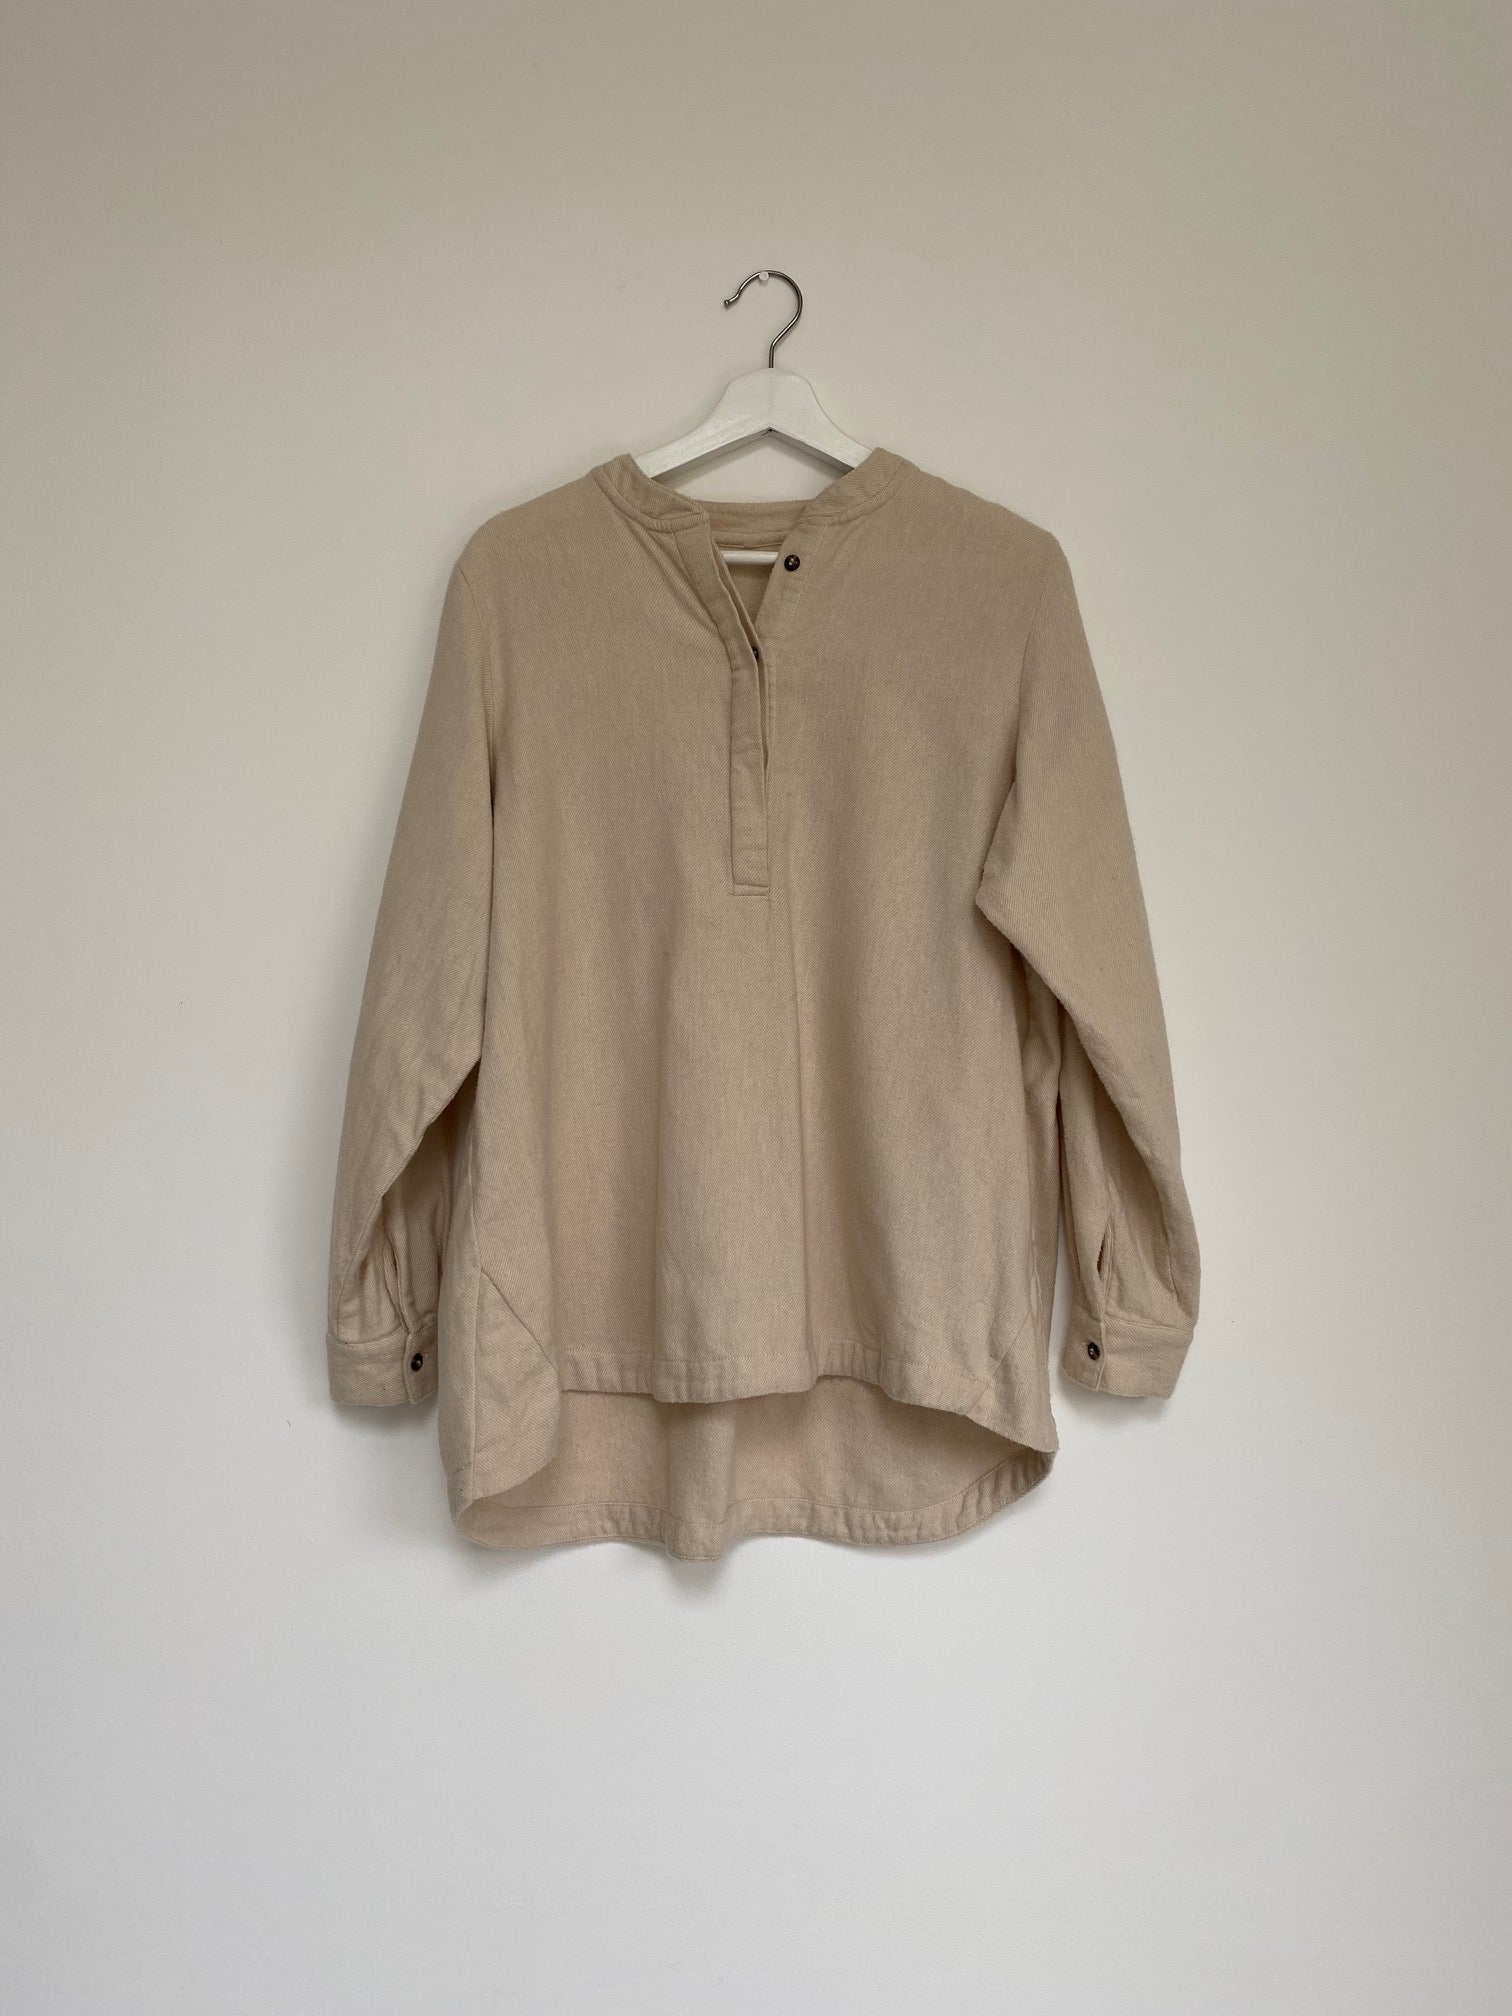 Beckie-Jane Blouse in Beige Size S